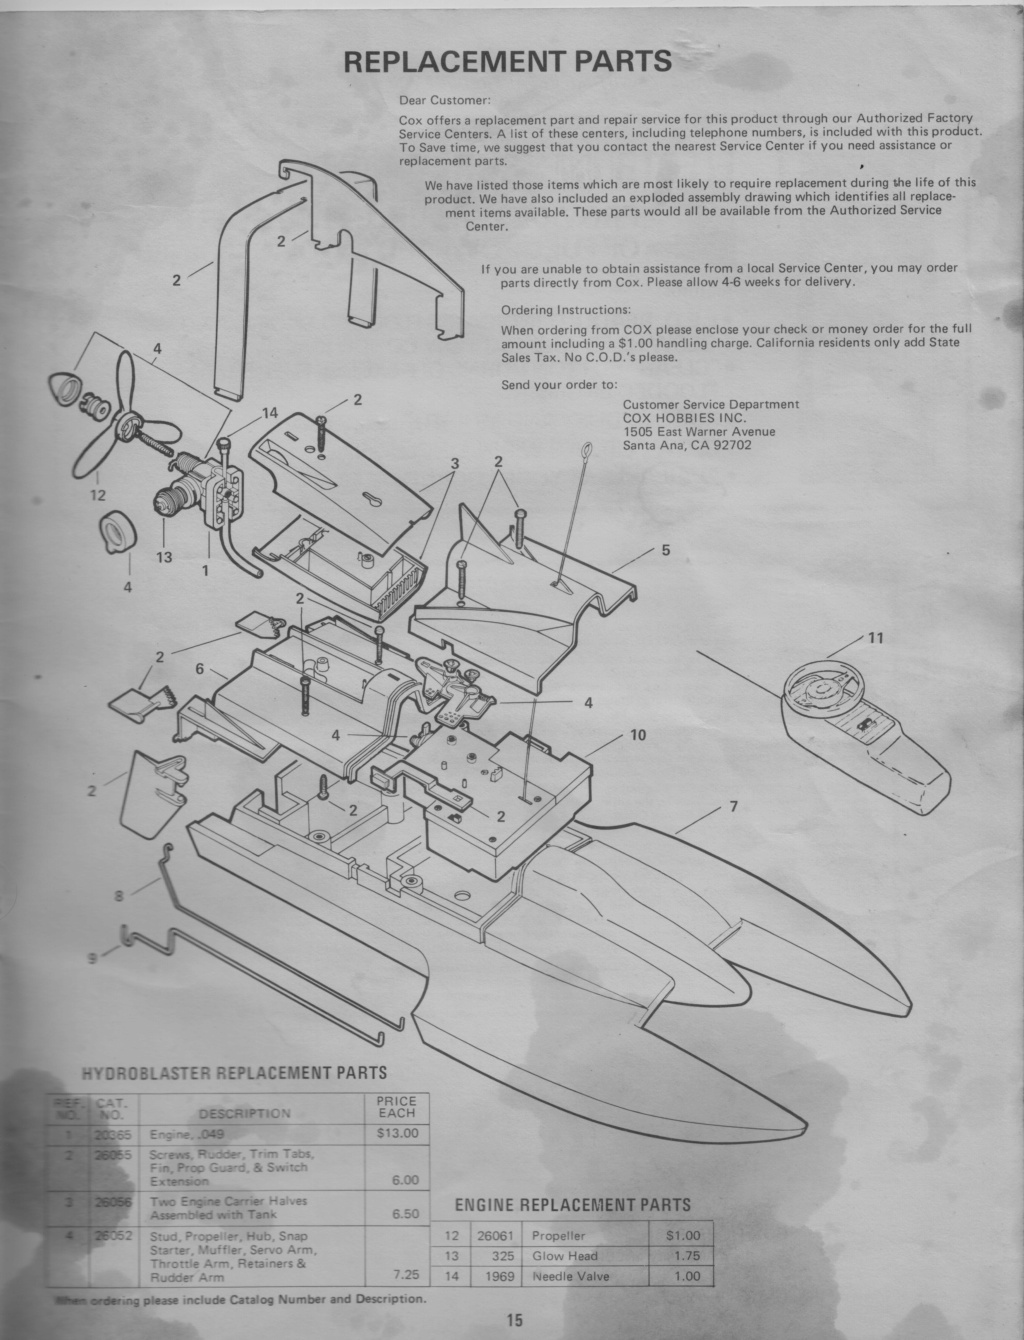 Hydro Blaster pictures and manual scans . Hydro_23